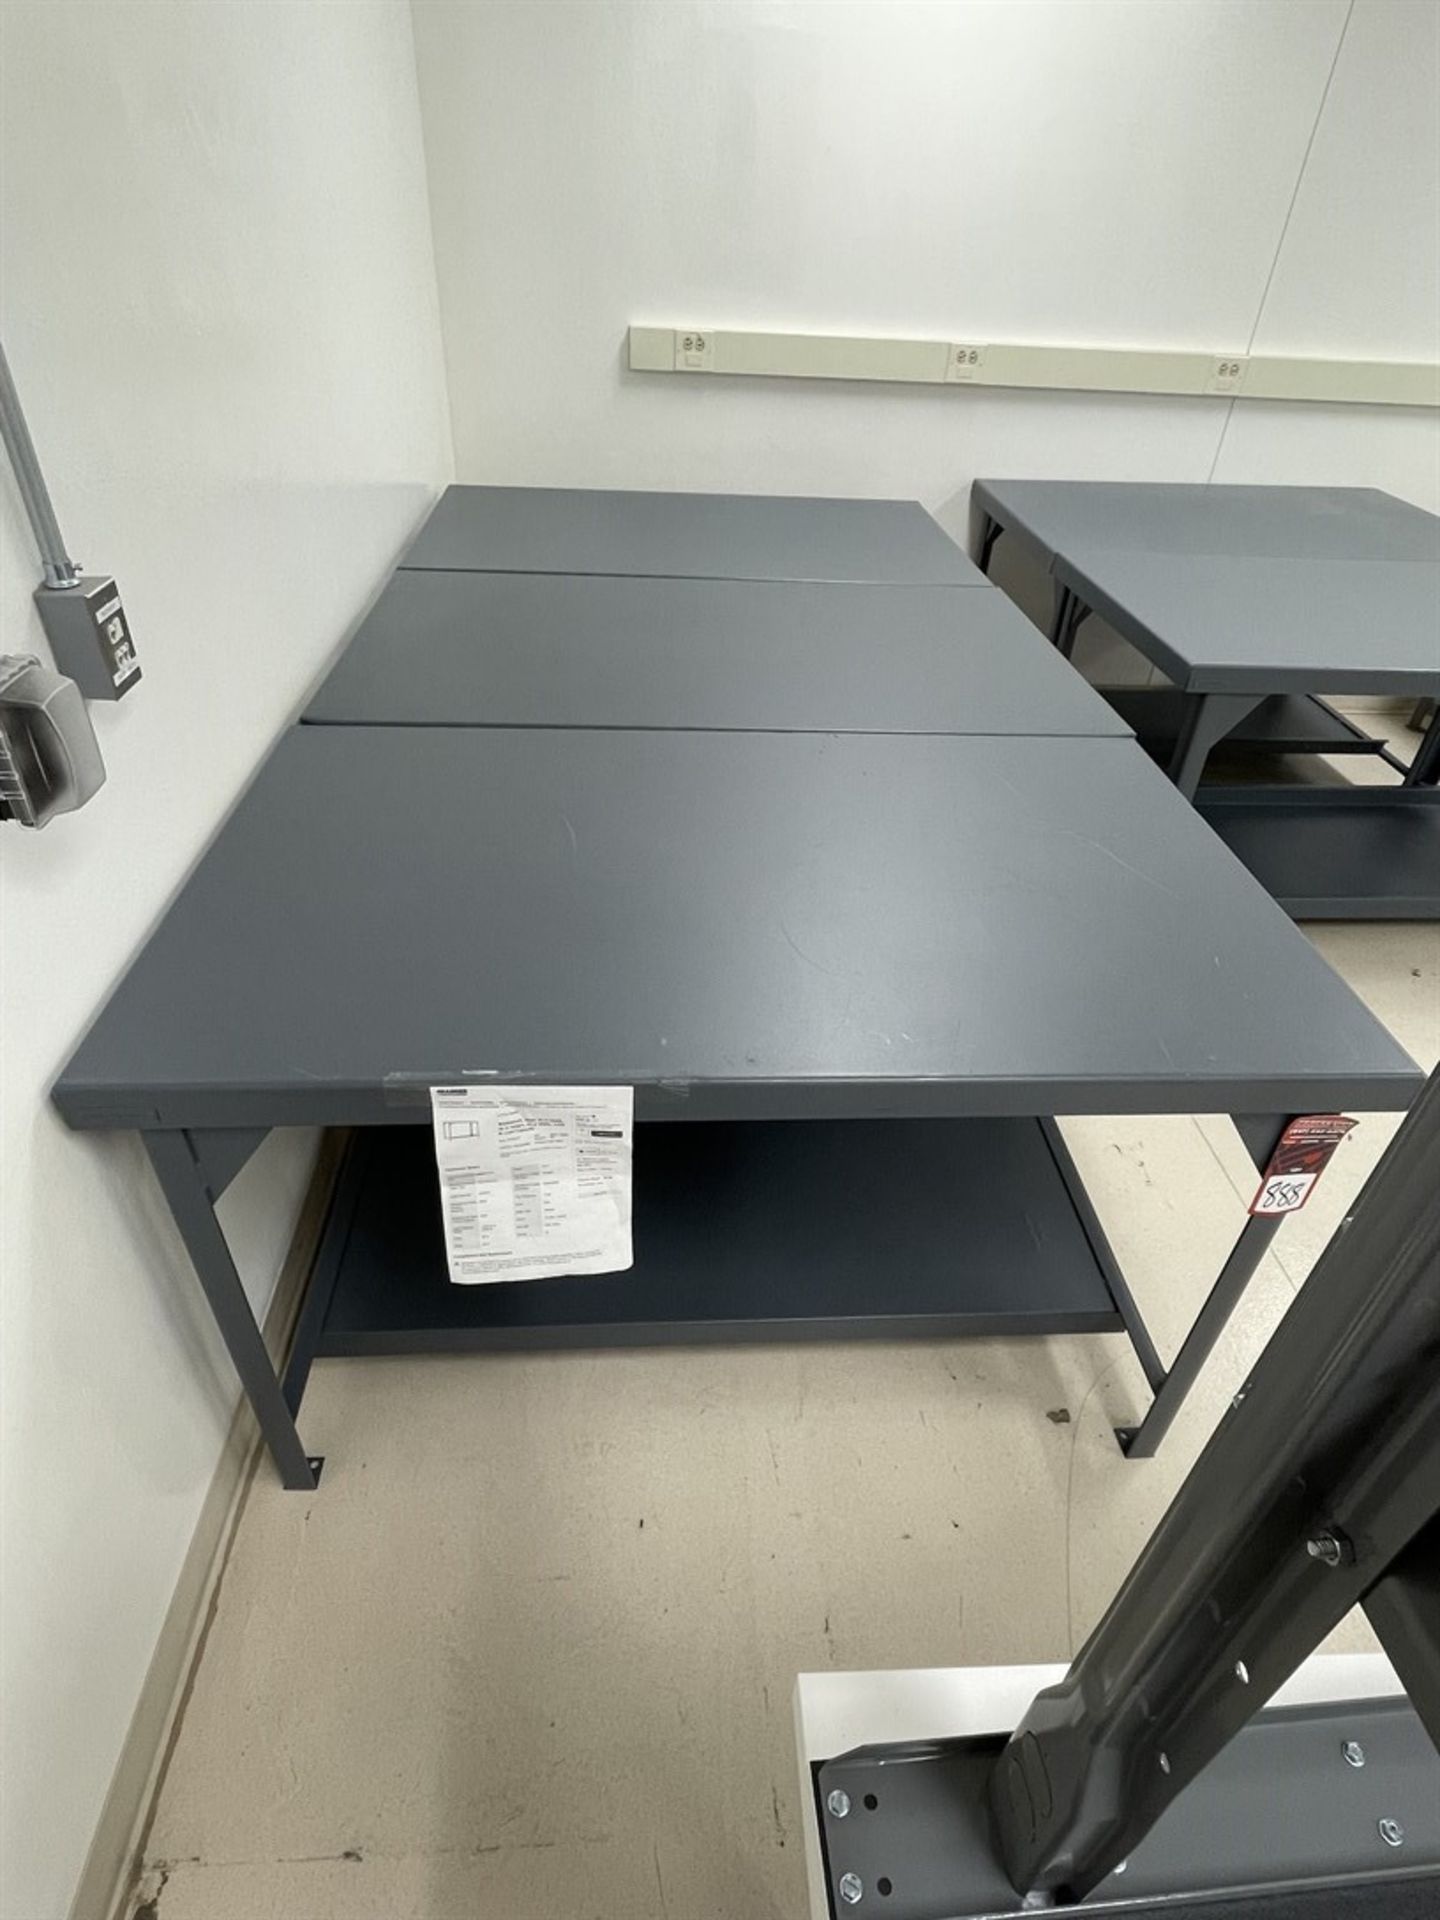 Lot of (3) LITTLE GIANT 36"D x 36"H x 60" W Heavy Duty Steel Workbenches, 4,500 Lb. Load Capacity - Image 2 of 2